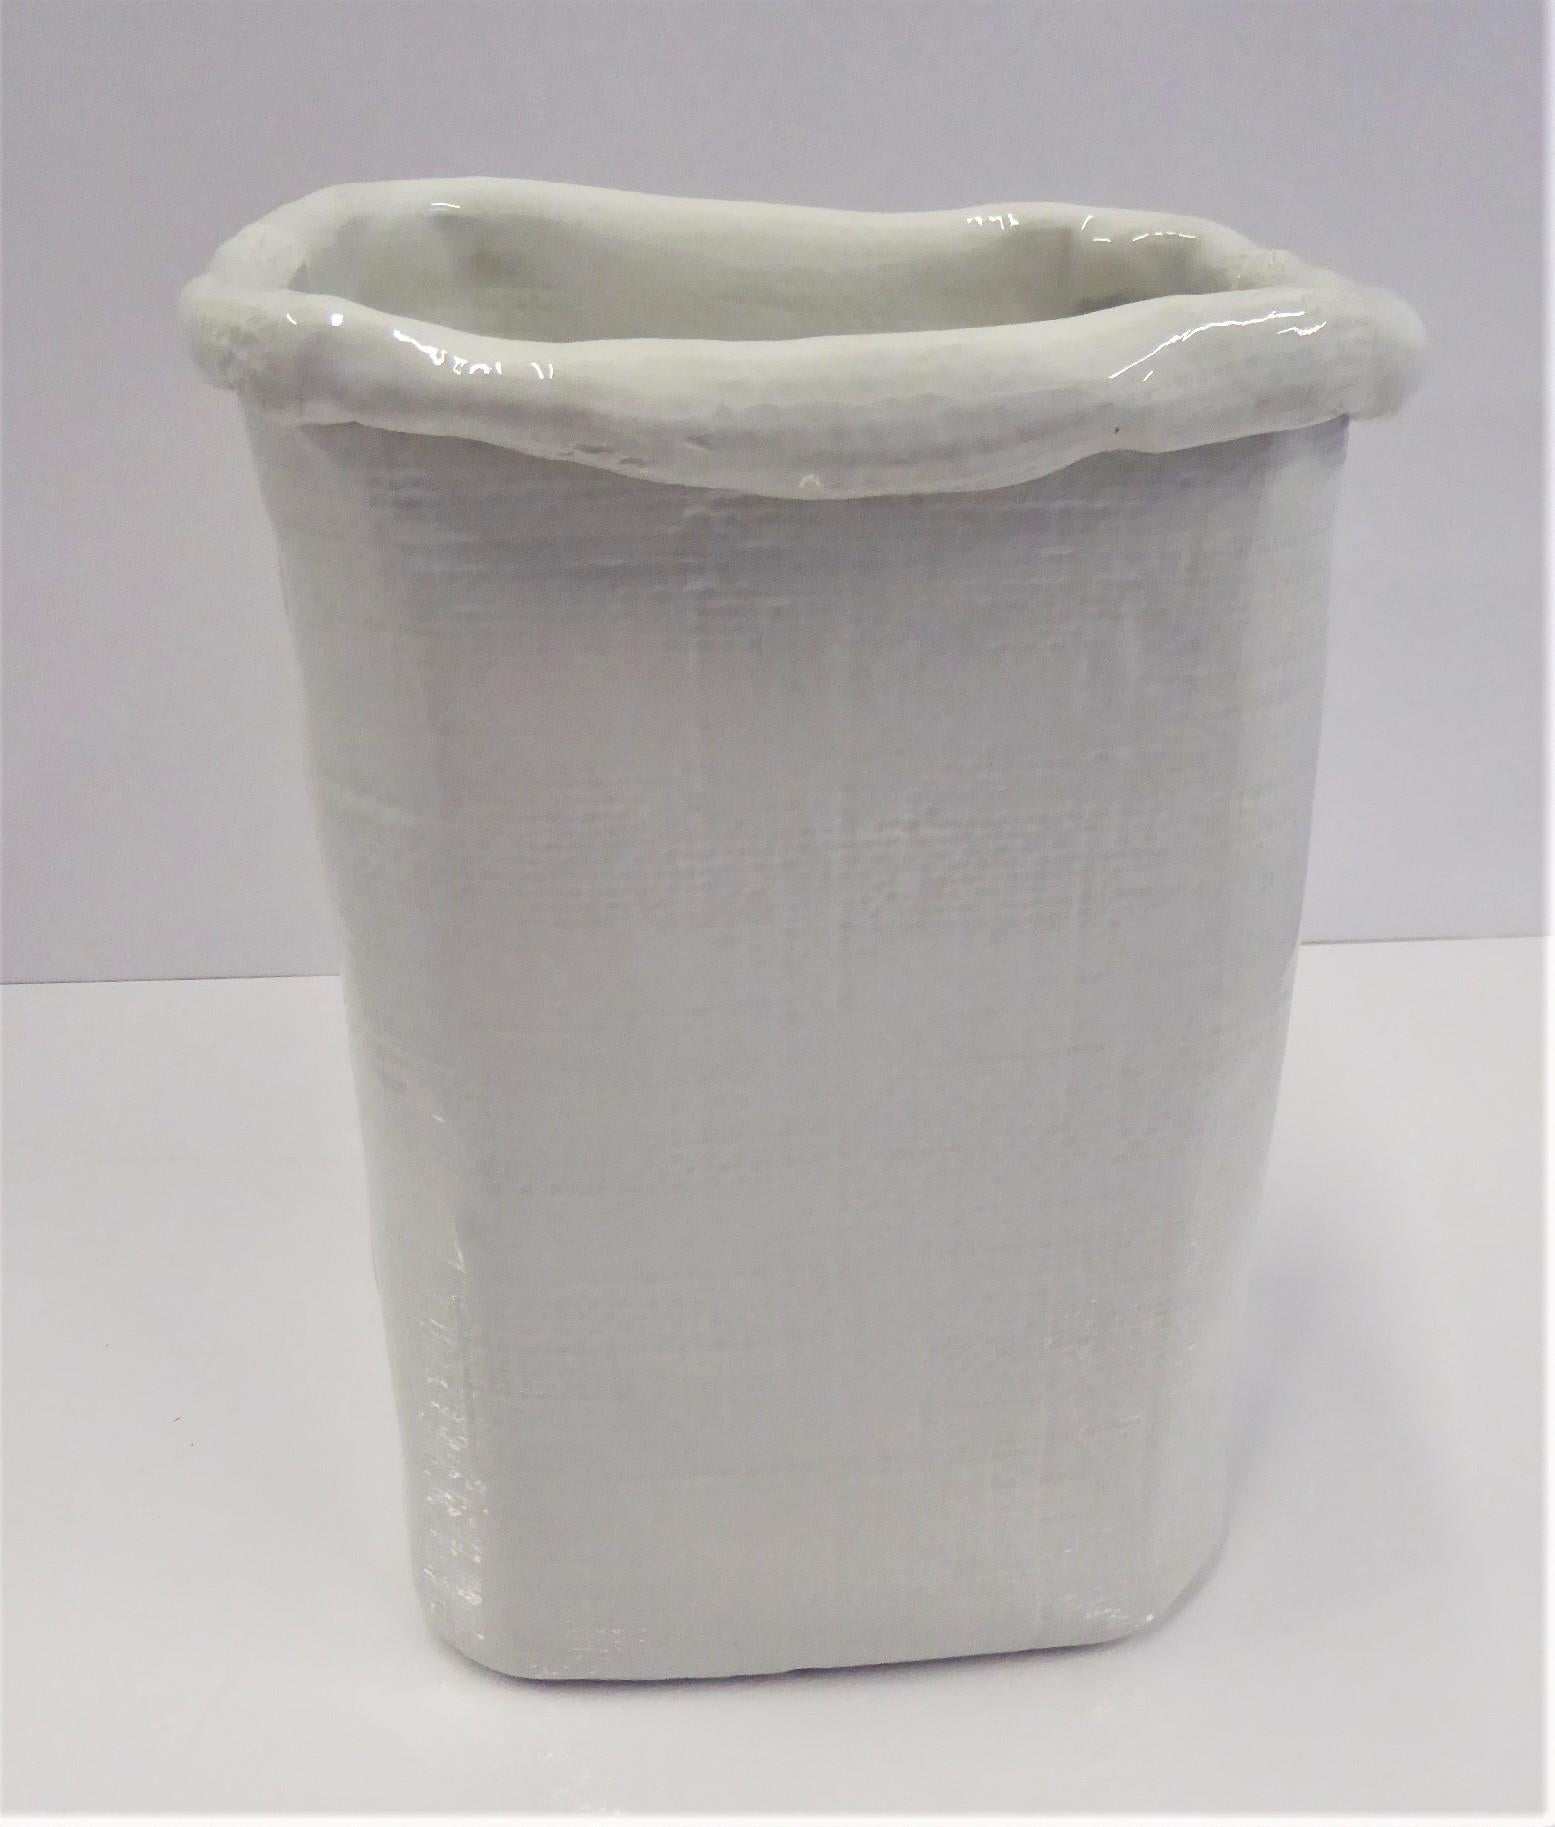 Italian Modern hand made ceramic white vase with a fluid free form shape representing a paper bag. A textured grid design on the outside with folds on the top edge and sides. The bottom incised with Made in ITALY 6494/33.

Measurements: Top- 7 1/2